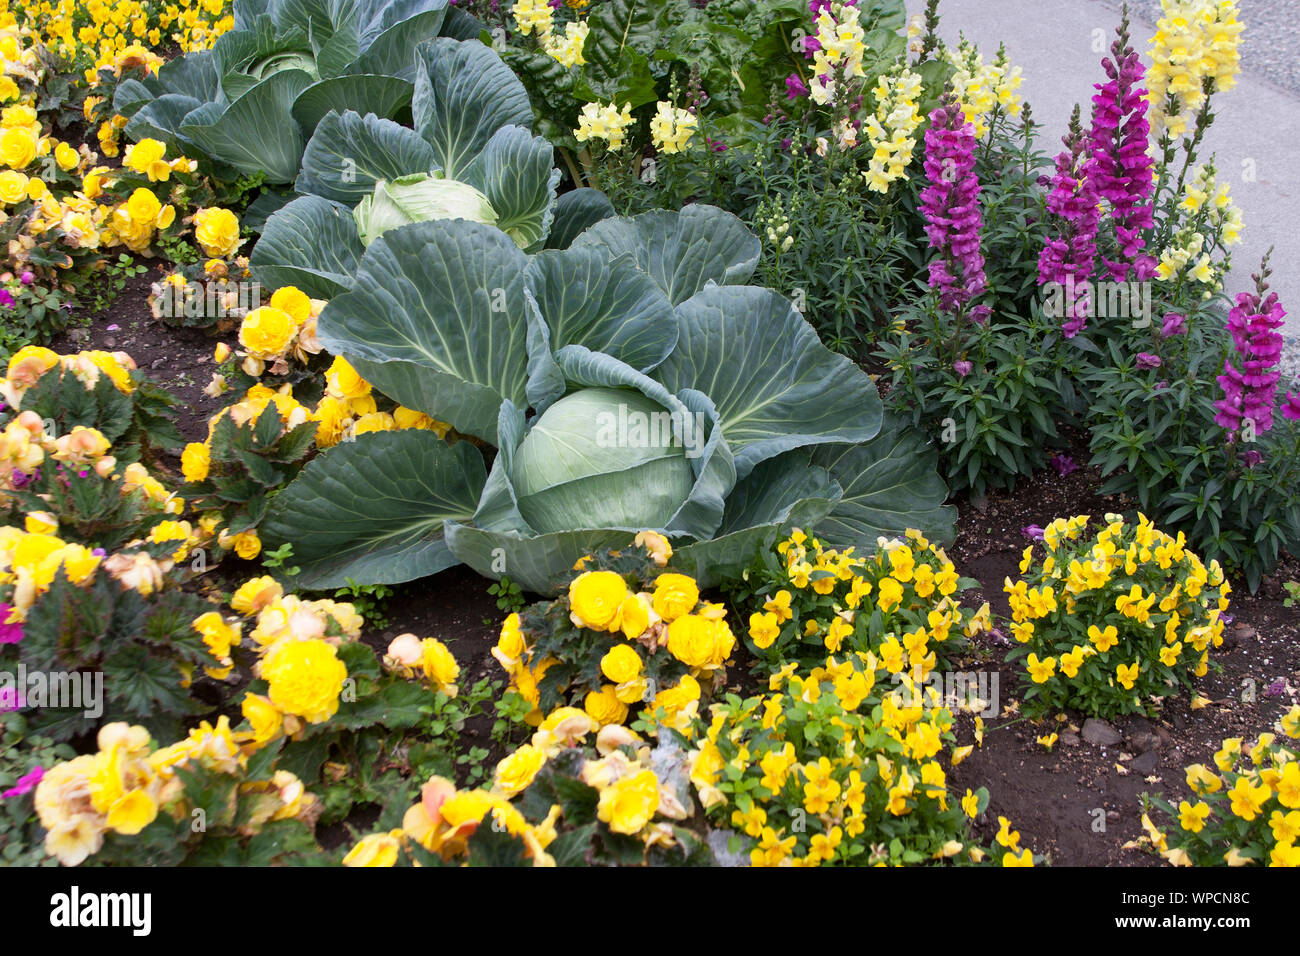 Green heads of cabbage grow in a colorful flower bed Stock Photo